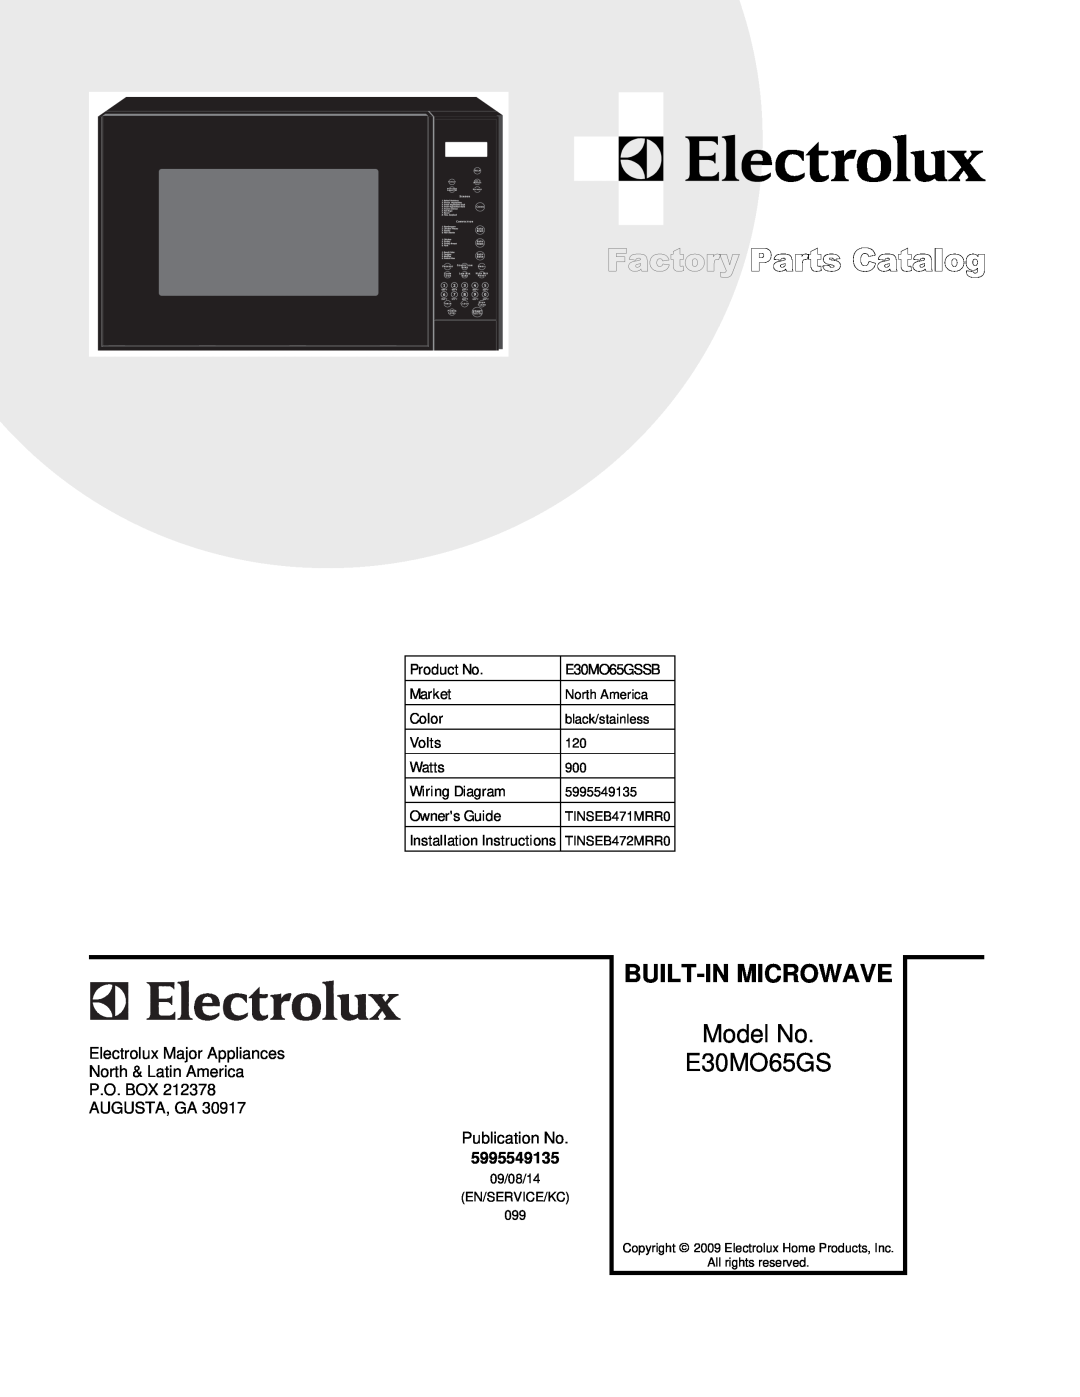 Electrolux E30MO65GSSB installation instructions Built-In Microwave, Model No, Electrolux Major Appliances, P.O. Box 